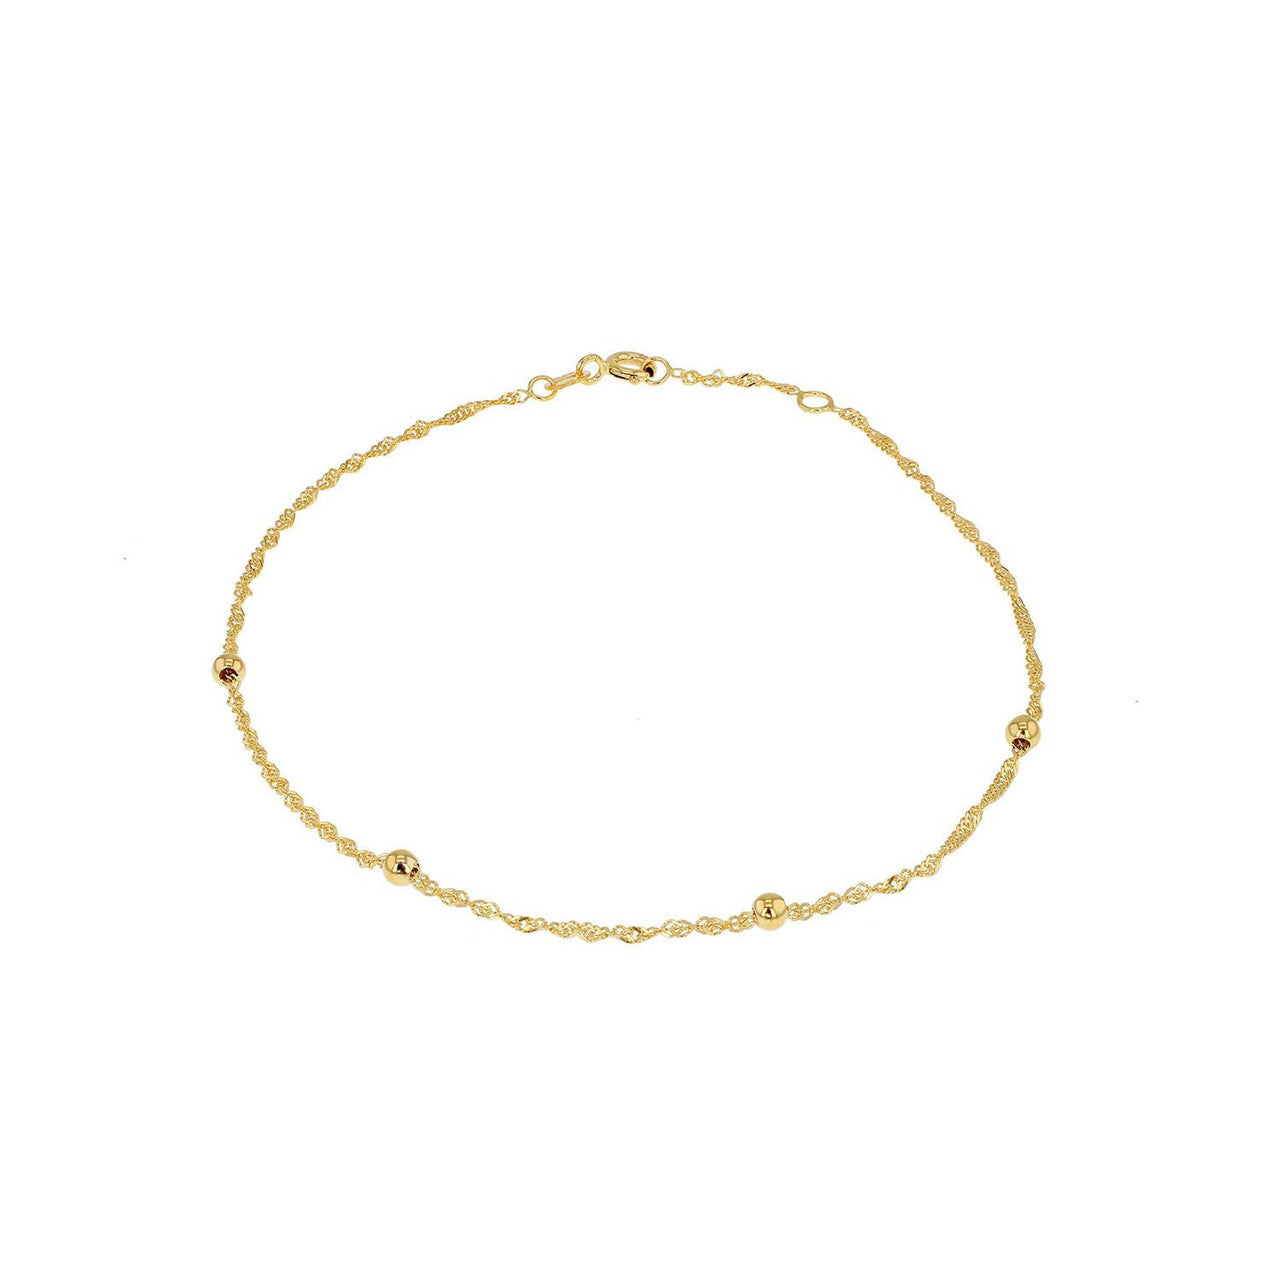 Ice Jewellery 9K Yellow Gold 3mm Balls and Twist Curb Chain Adjustable Anklet 22.5cm-24cm - 1.23.1384 | Ice Jewellery Australia